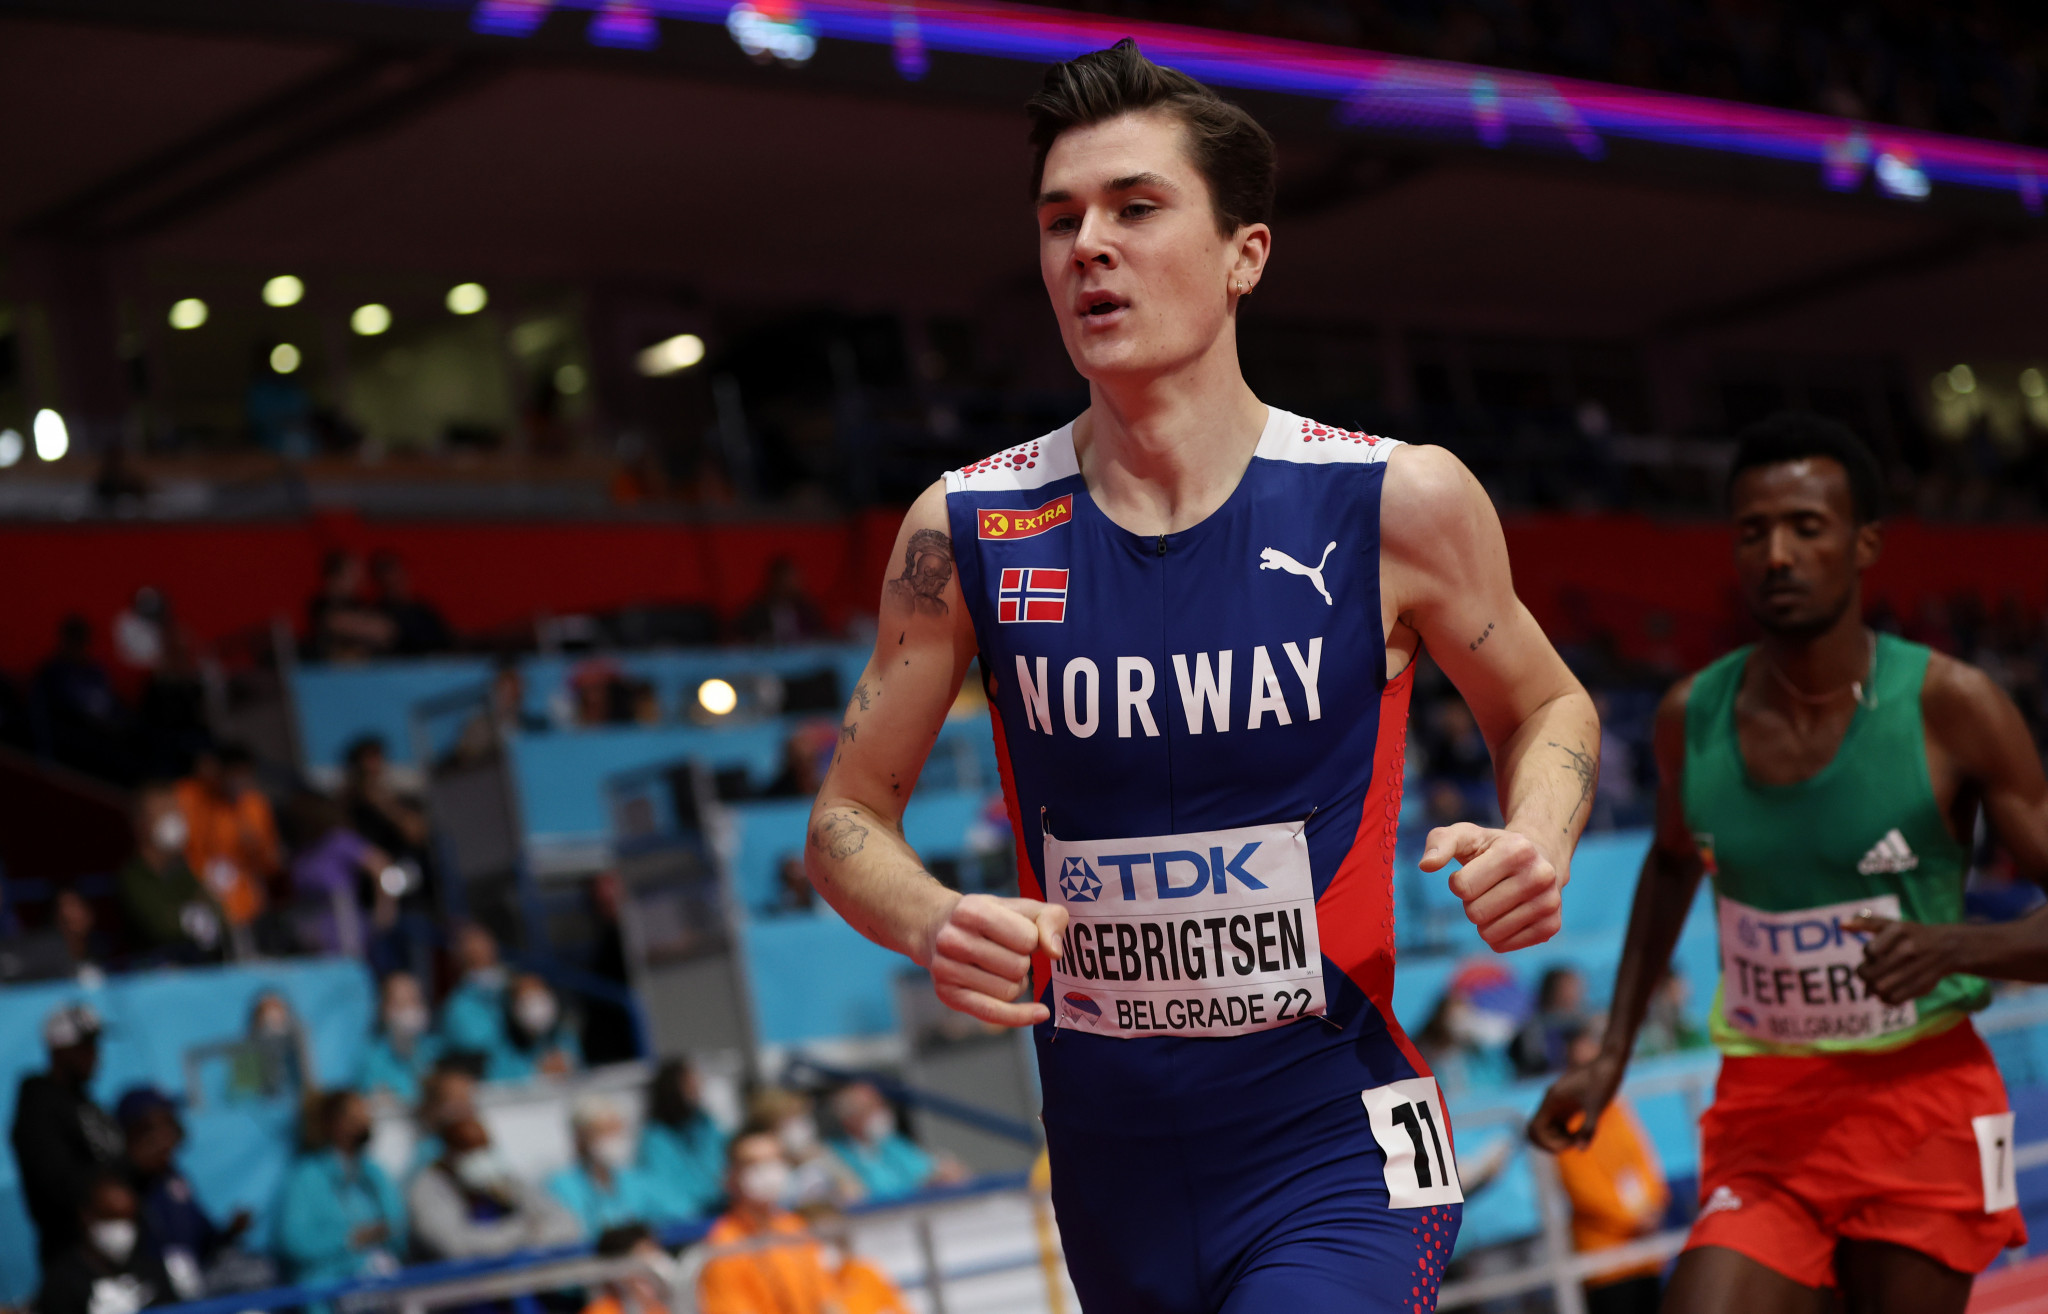 Olympic champion Jakob Ingebrigtsen is due to be defending two titles at Munich 2022 ©Getty Images